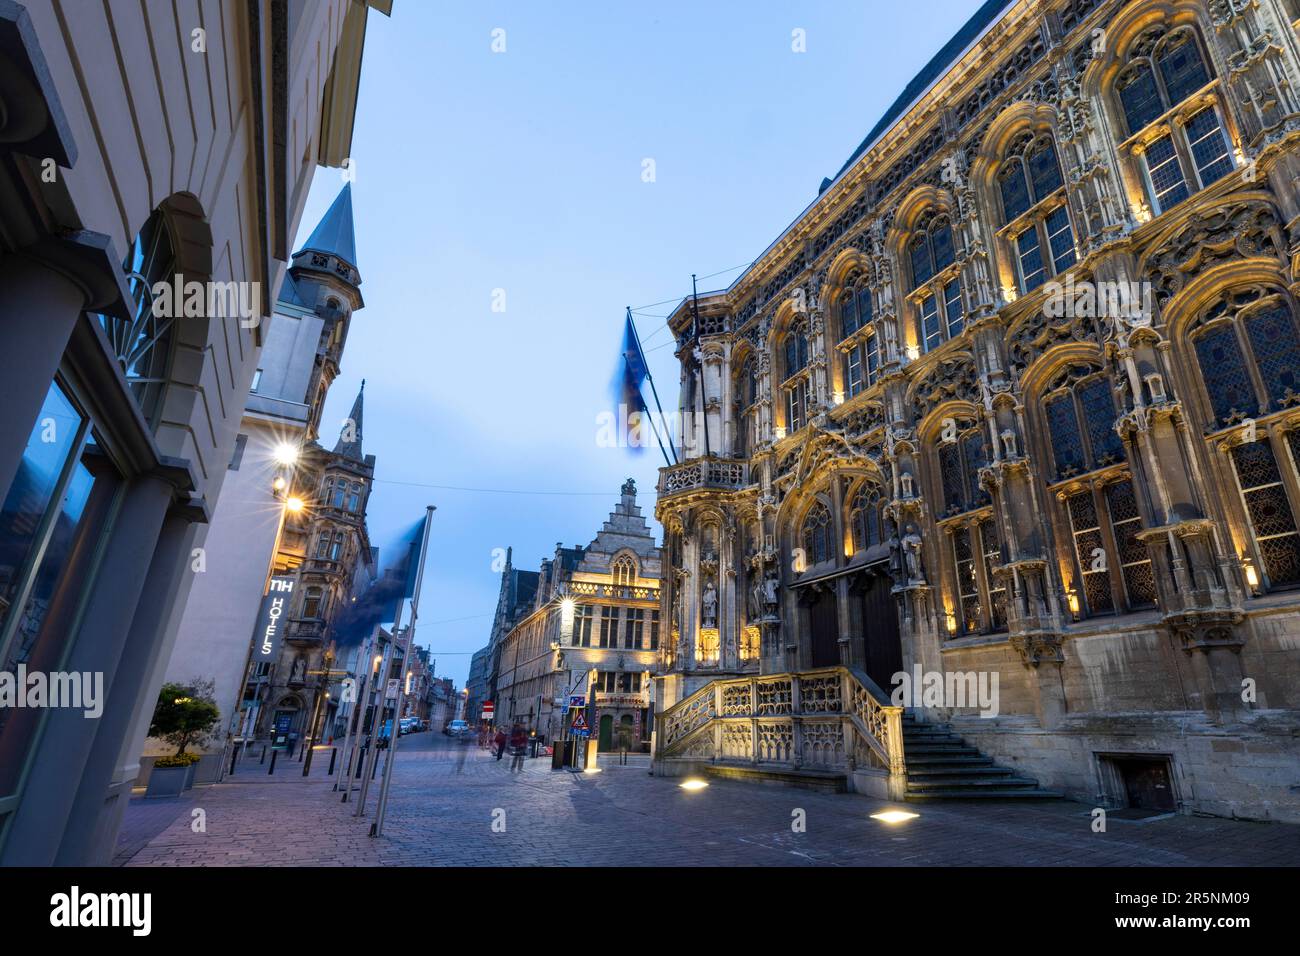 Evening atmosphere in the pedestrian zone, on the right Stadhuis, City Hall, Belfry, Ghent, Belgium Stock Photo